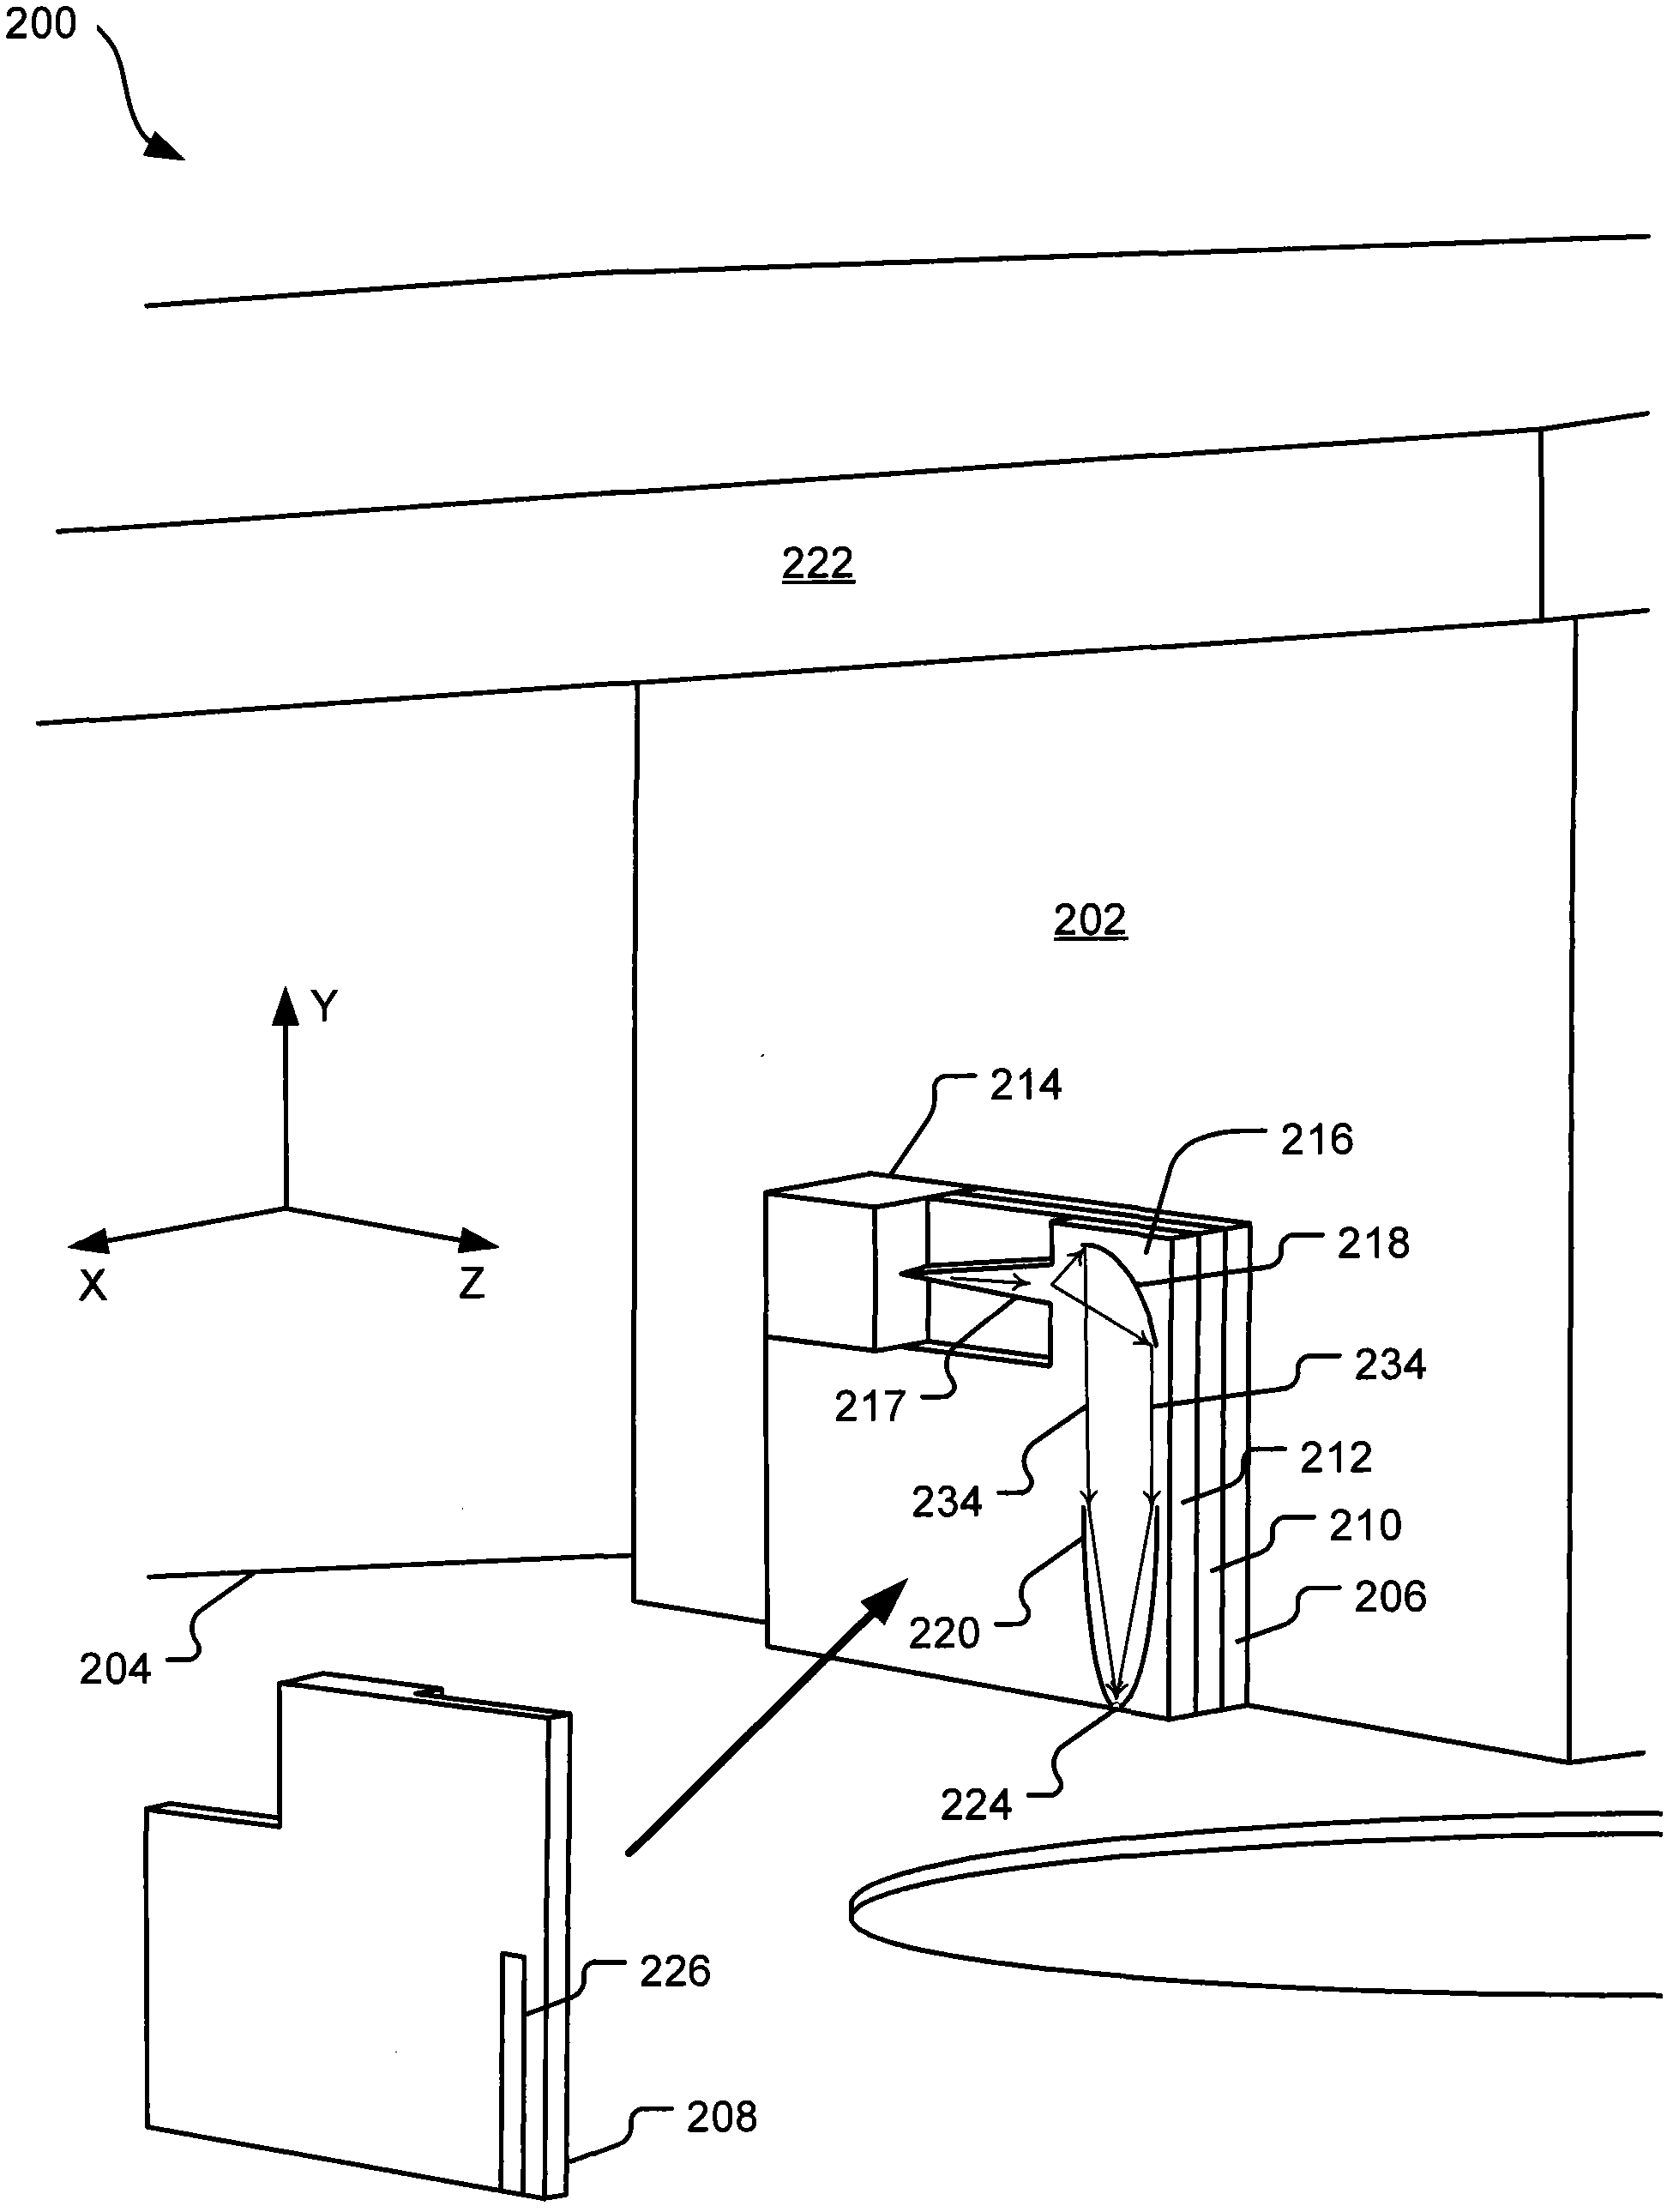 Light delivery waveguide